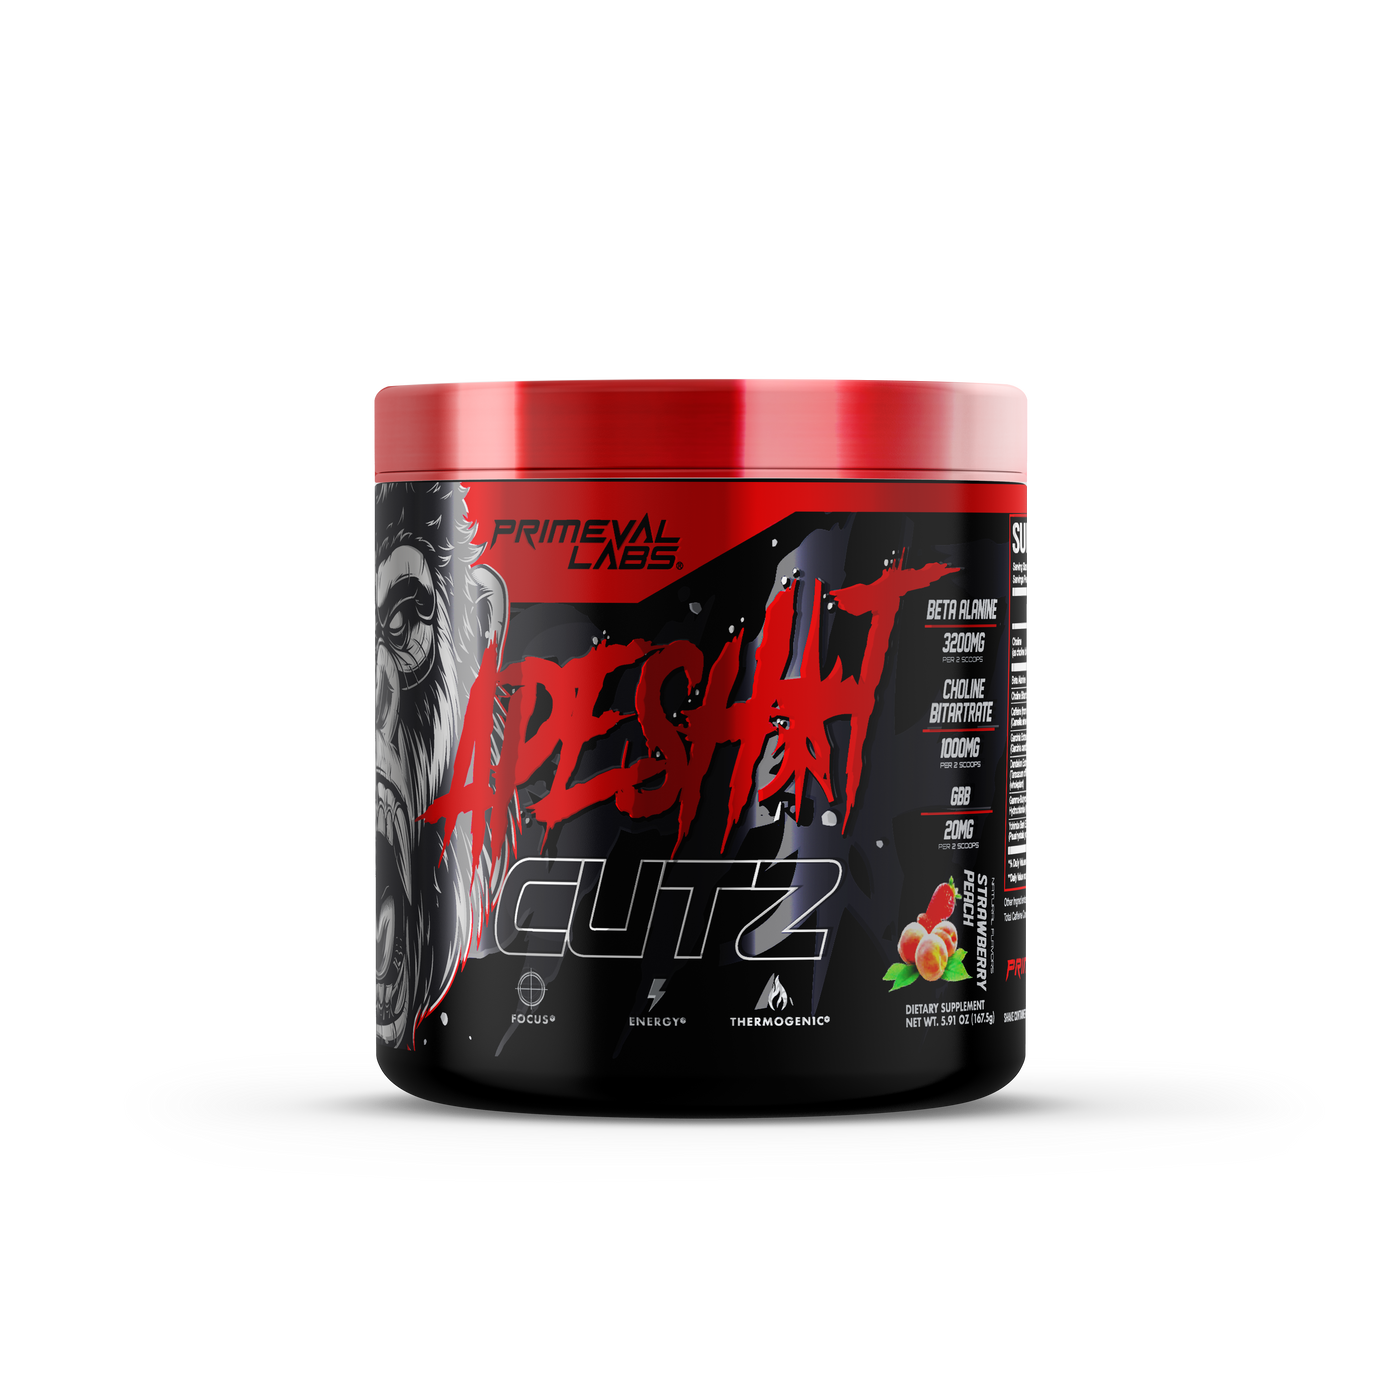 Ape Sh*t Cutz Thermogenic Pre-Workout PRE WORKOUT - Primeval Labs